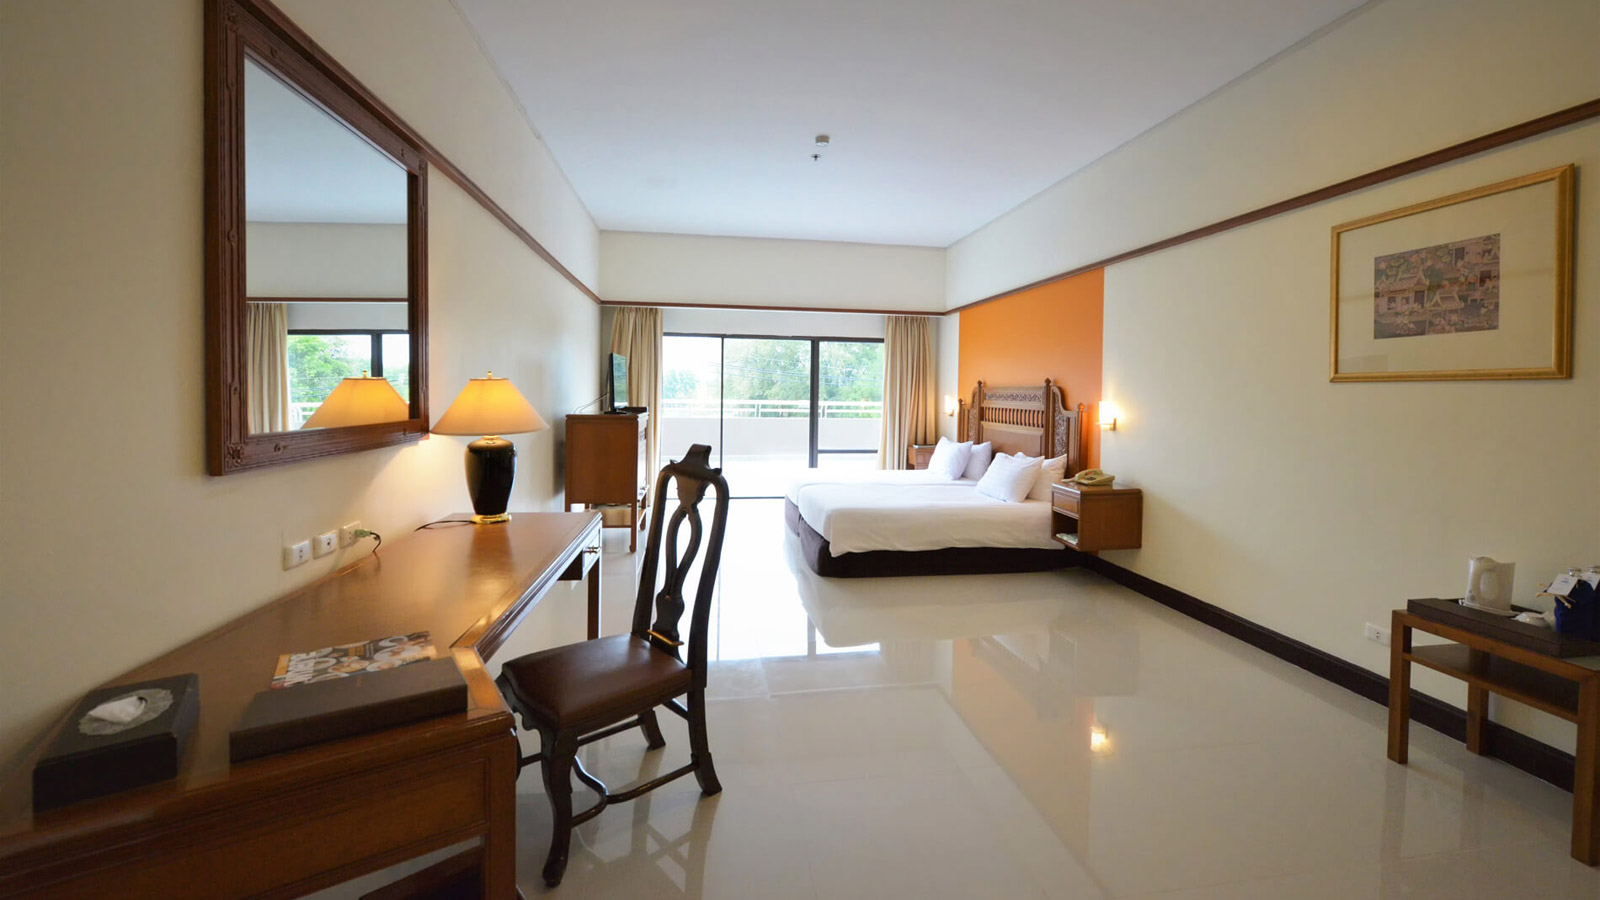 Grand Deluxe Twin at Loei Palace Hotel - 黎府宫殿酒店